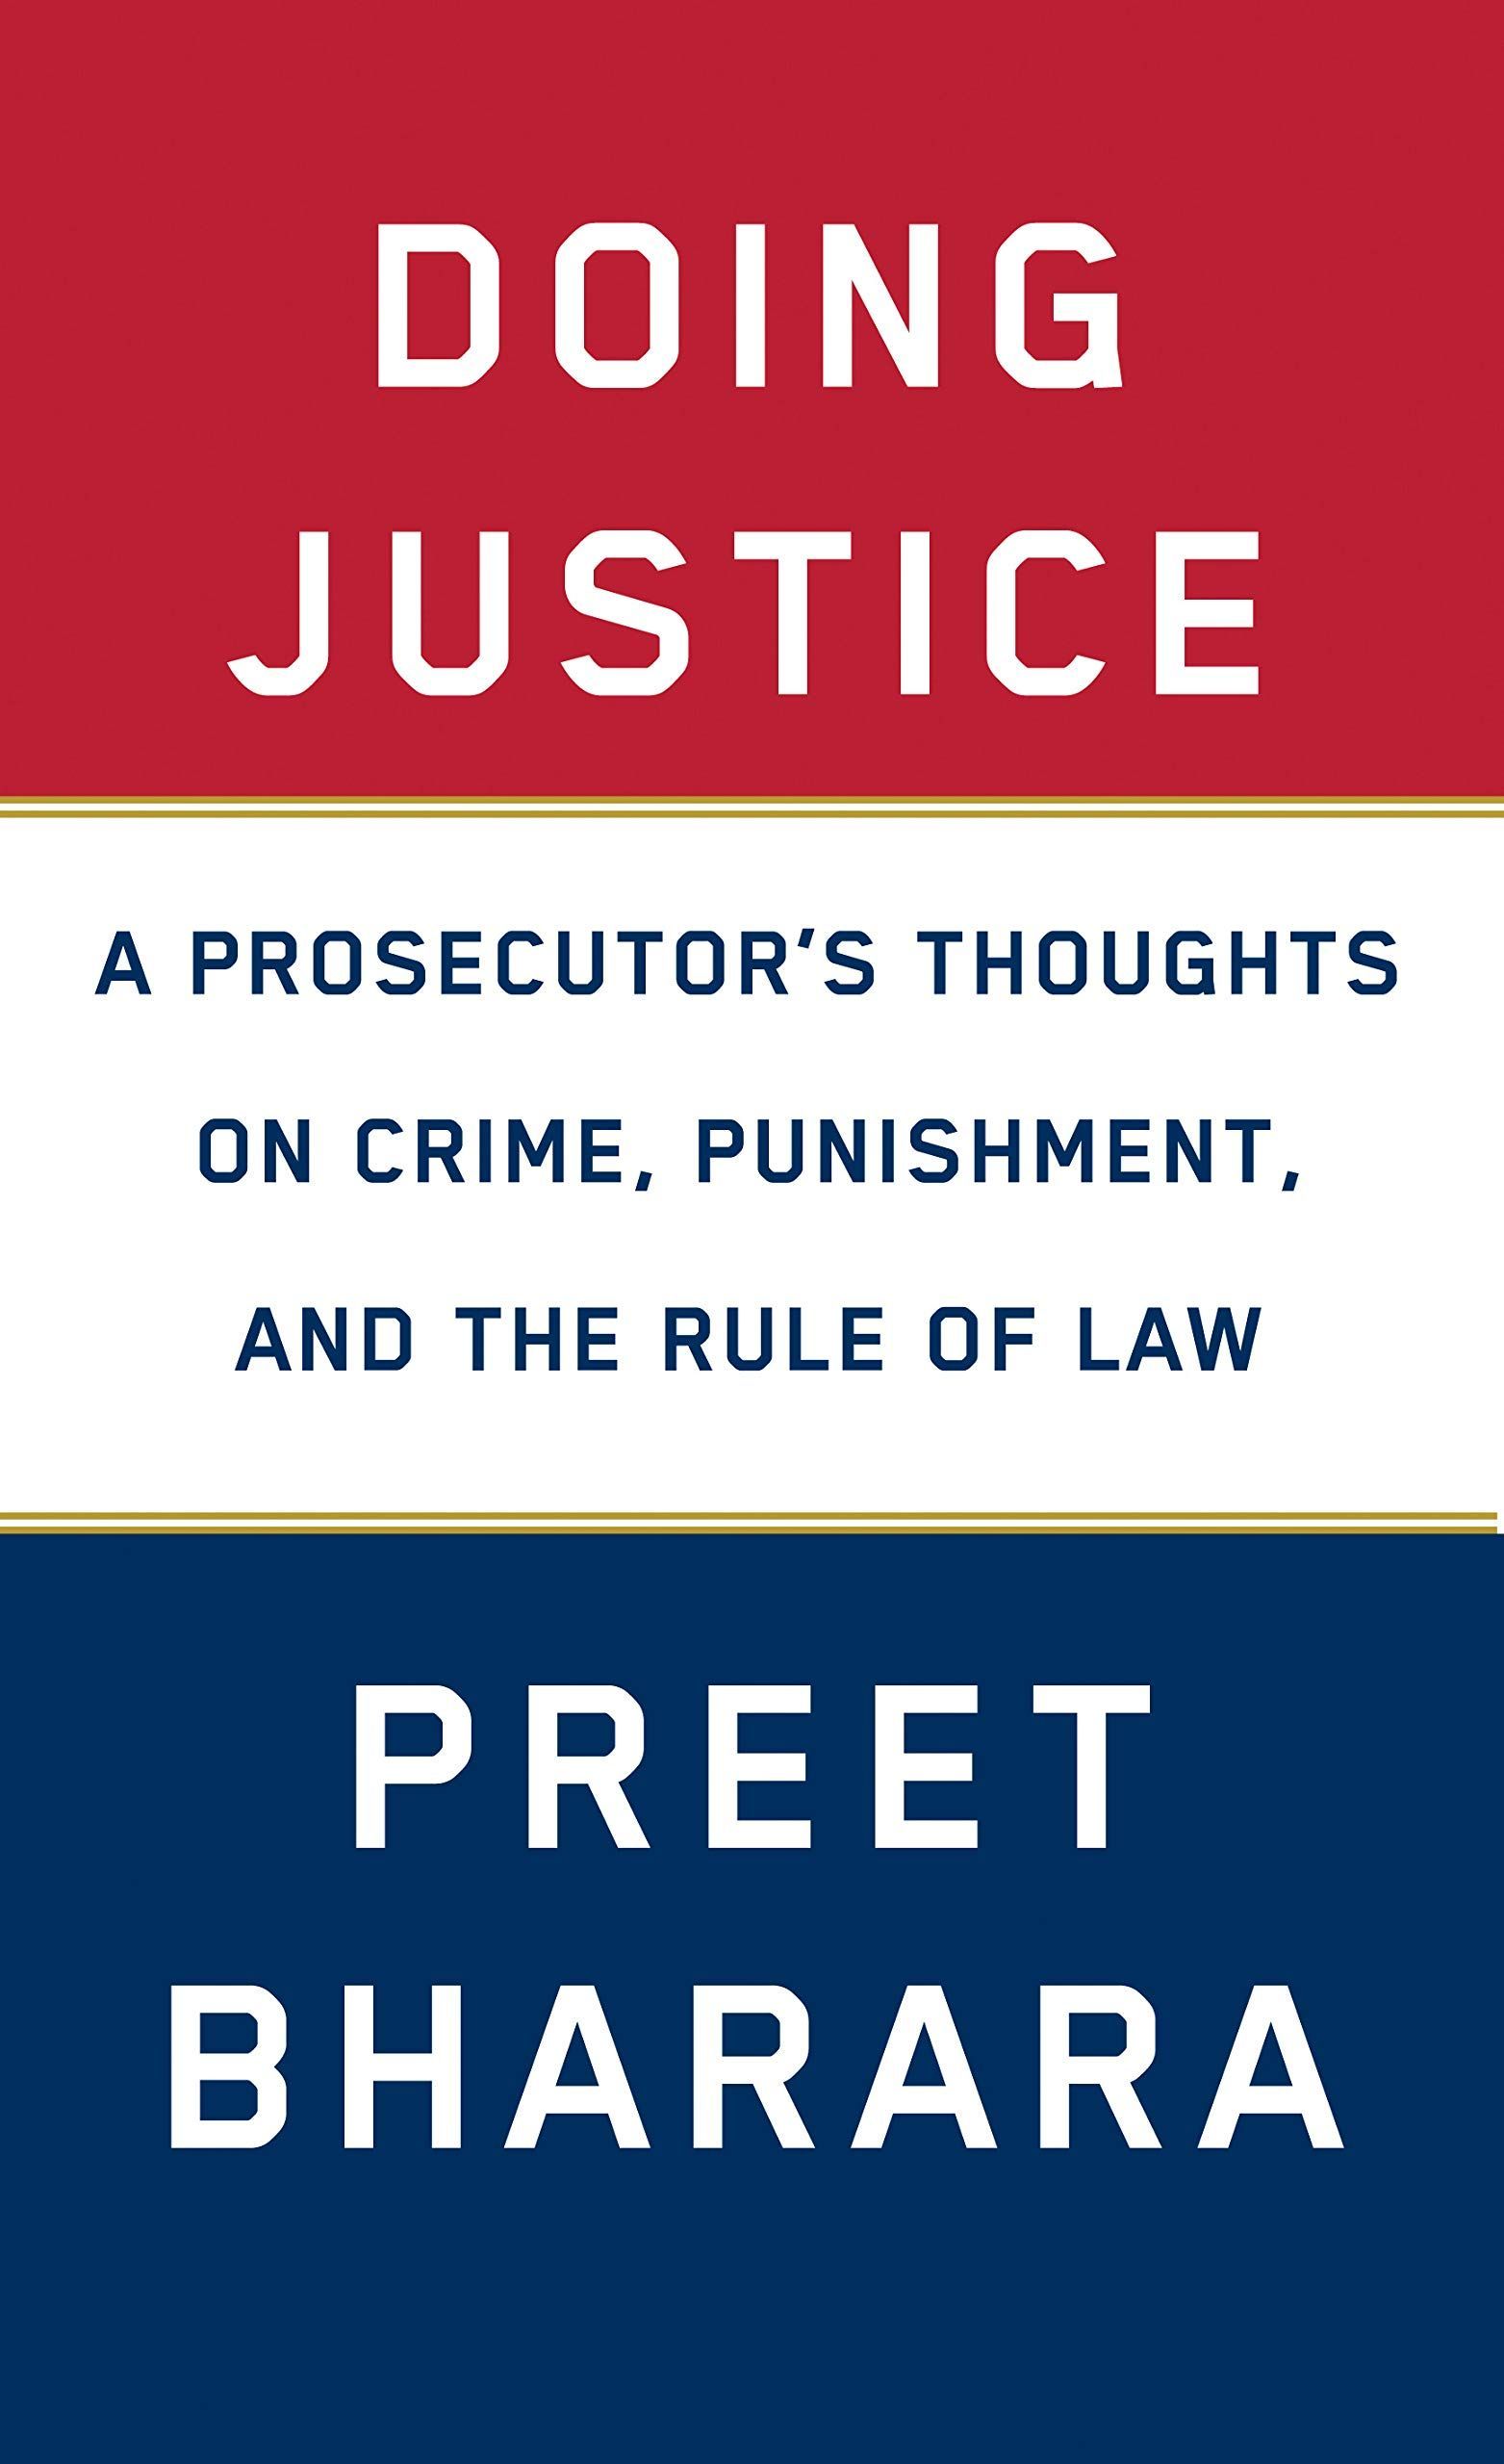 A Prosecutor’s Guide to the Just and Fair: On Preet Bharara’s “Doing Justice”